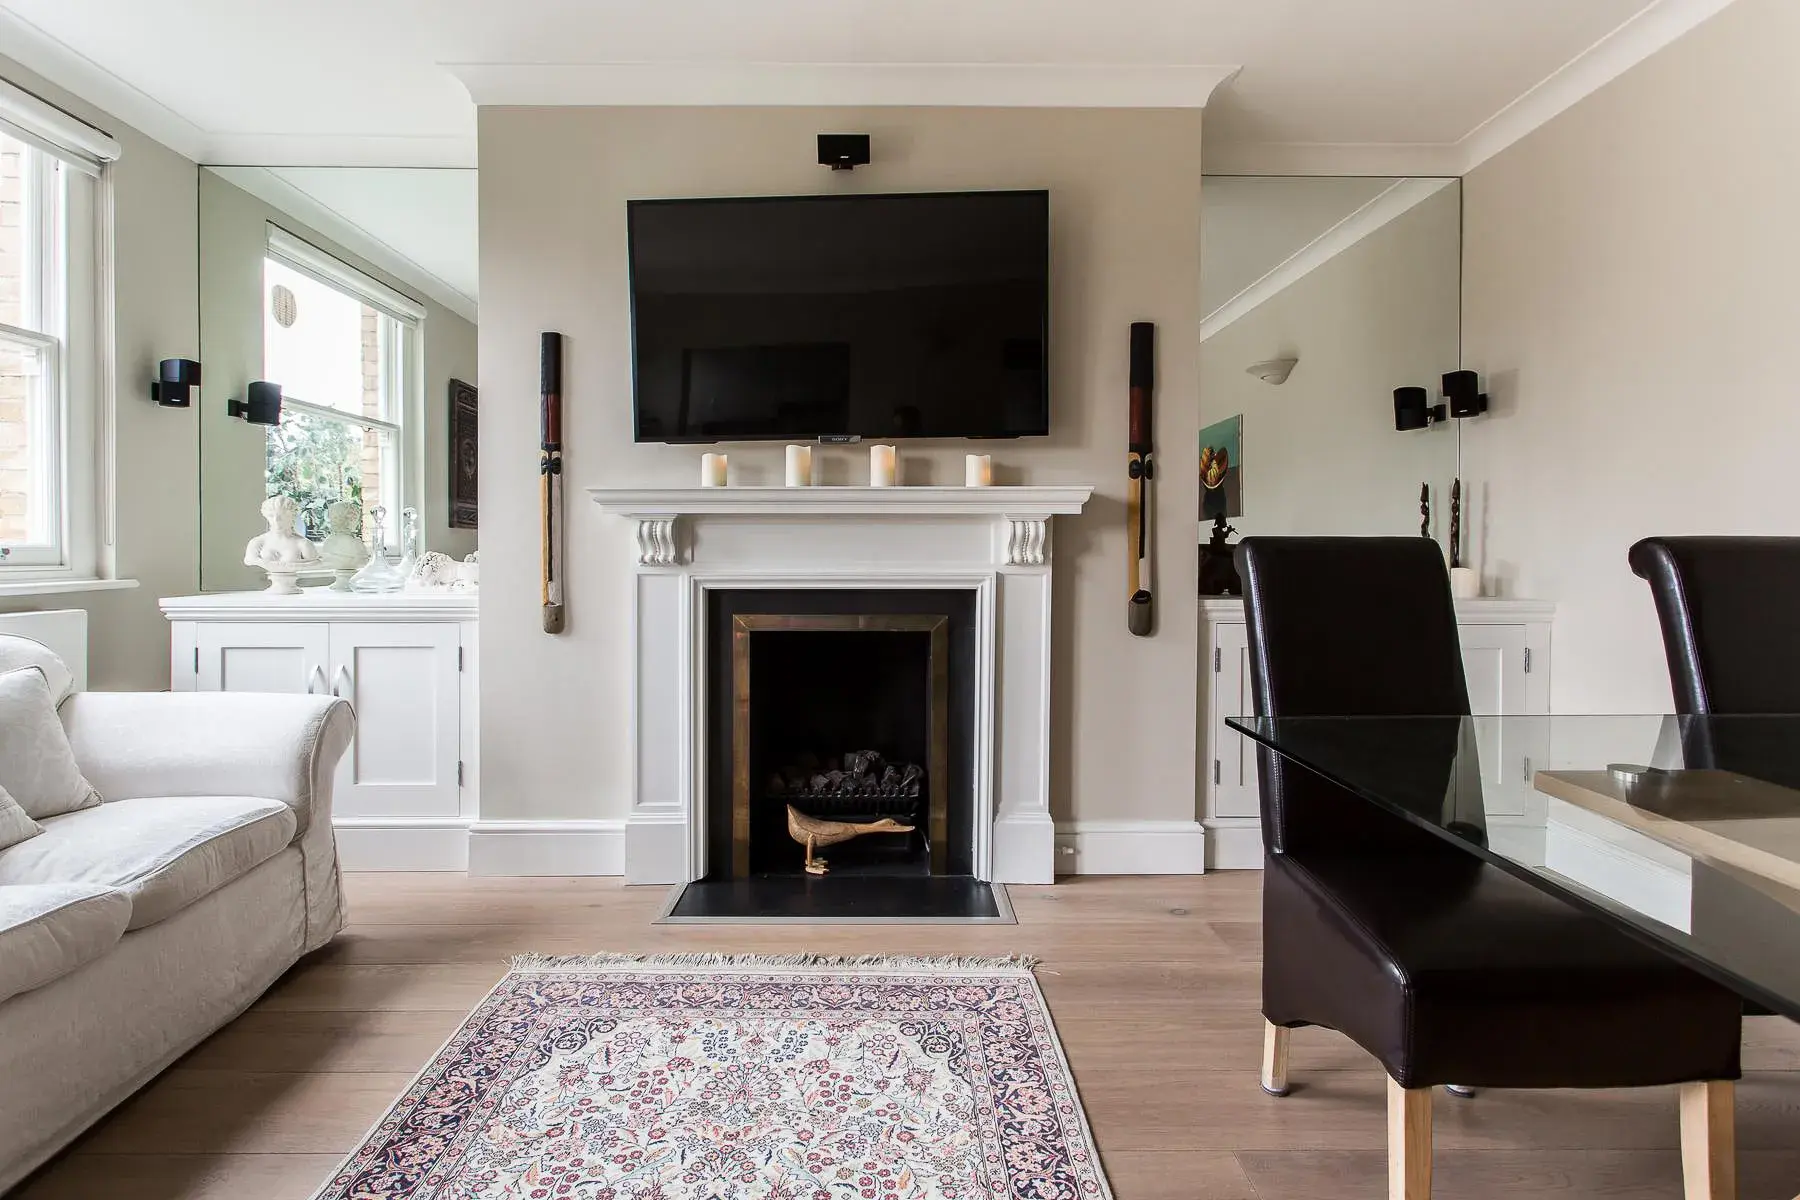 Castellain Road, holiday home in St Johns Wood, London